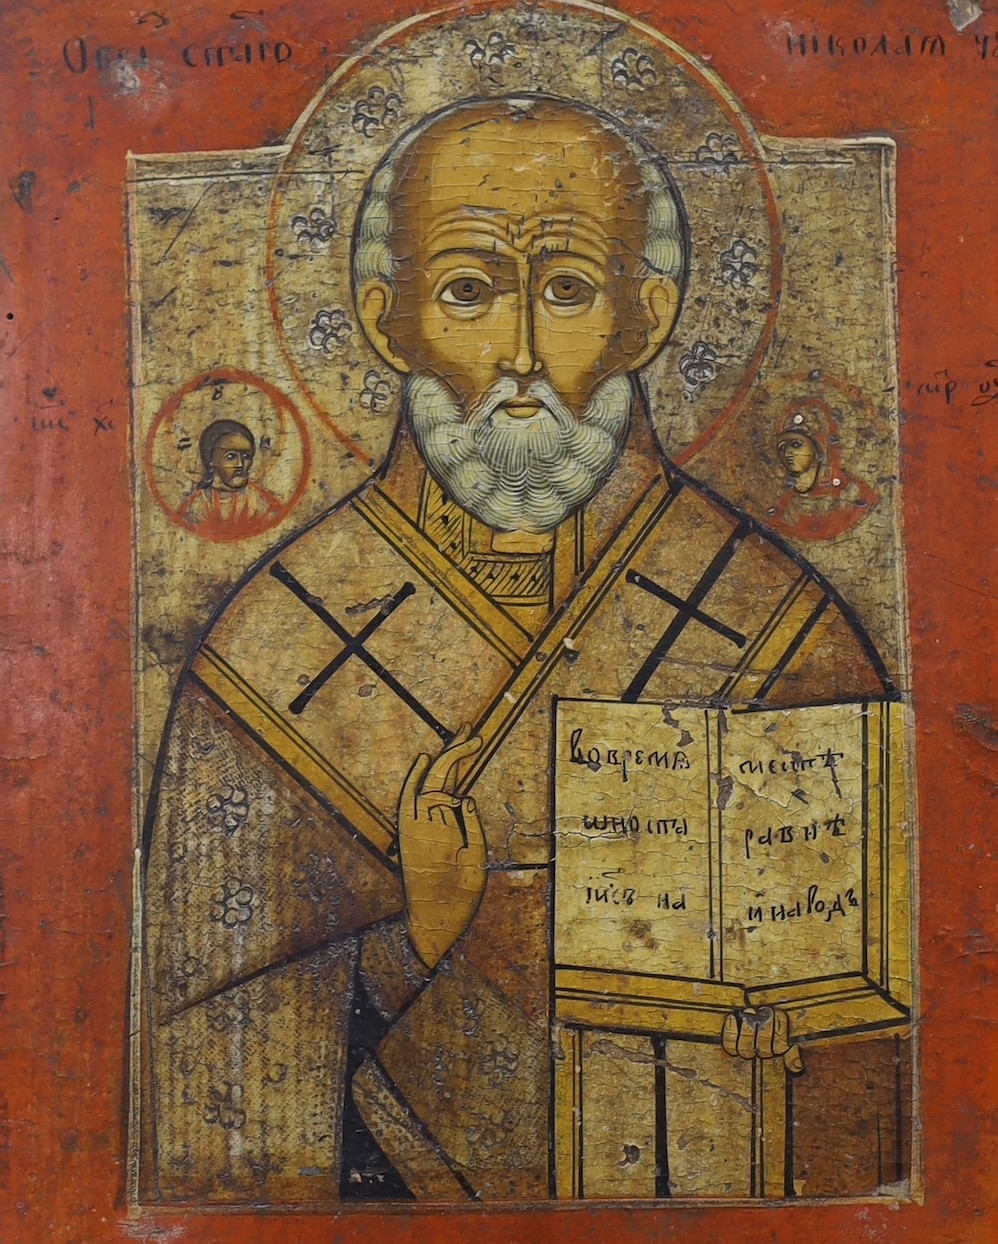 19th century South Russian School, tempera on wooden panel, Icon of St. Nicholas holding the scripture and giving a benediction, 28 x 22cm, unframed